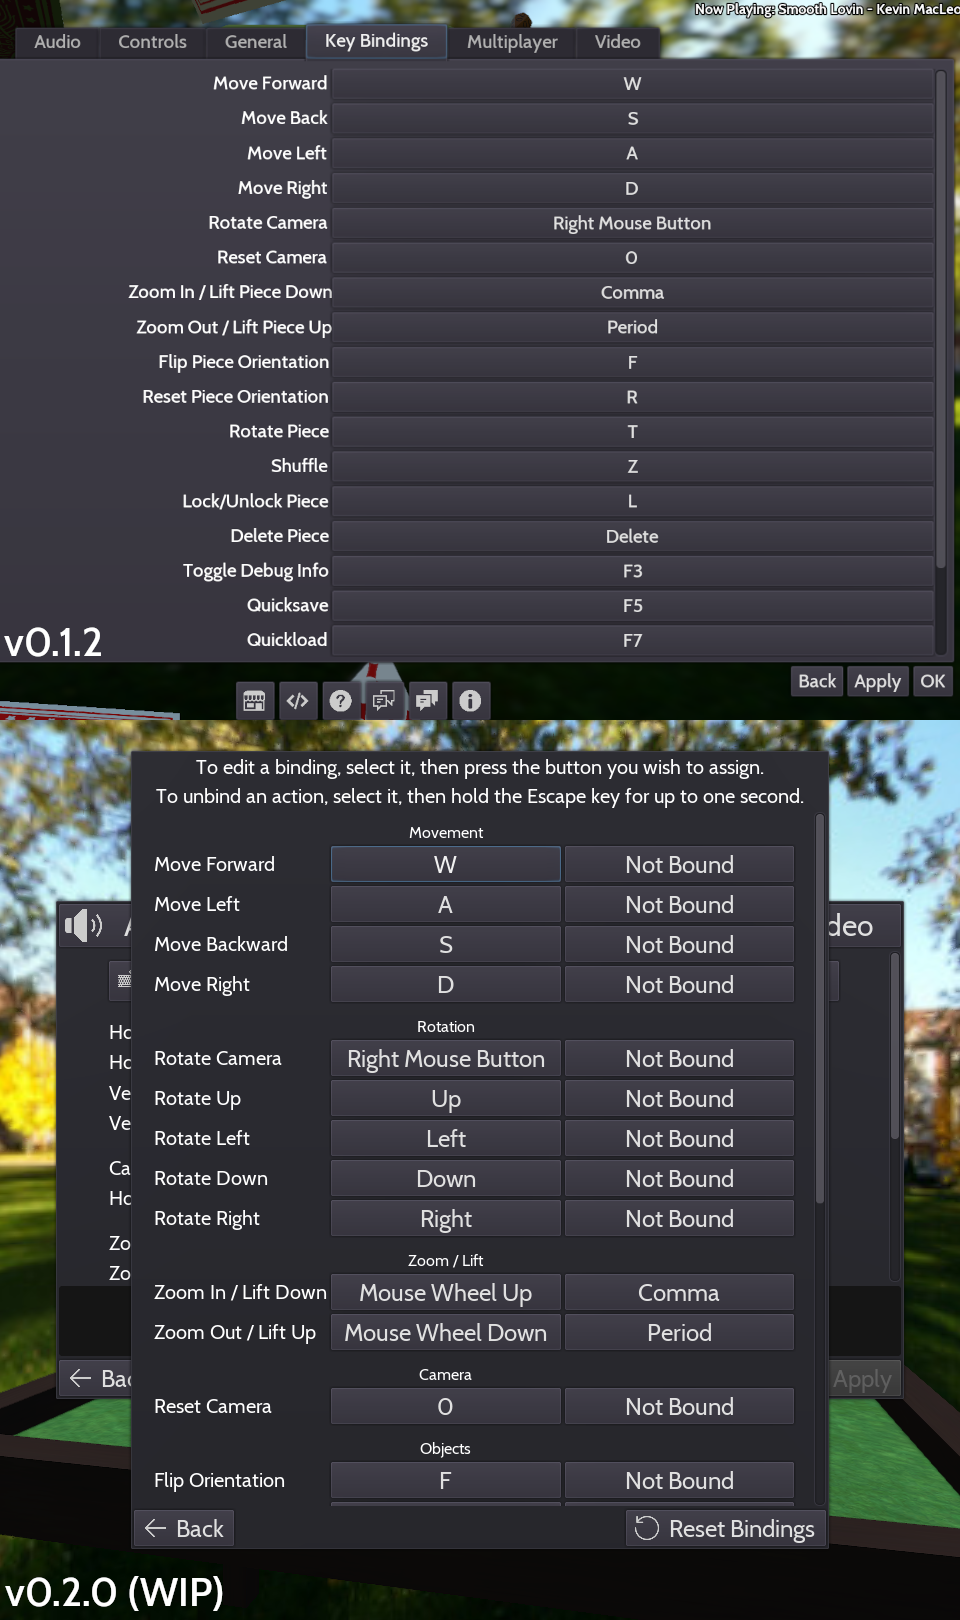 A comparison between the v0.1.2 key bindings menu and the v0.2.0 one.